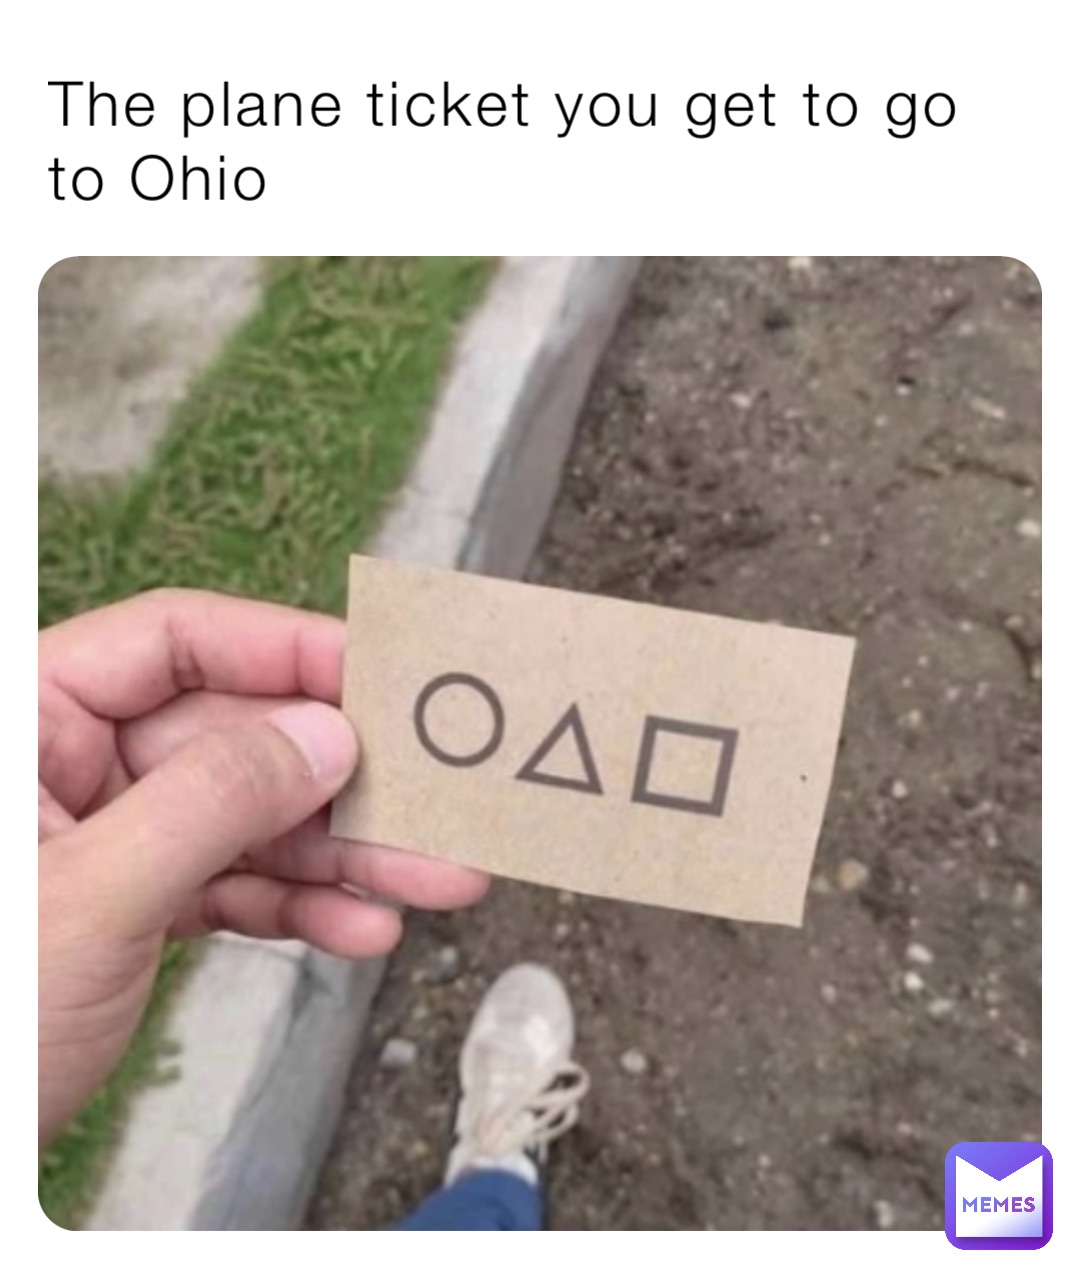 The plane ticket you get to go to Ohio